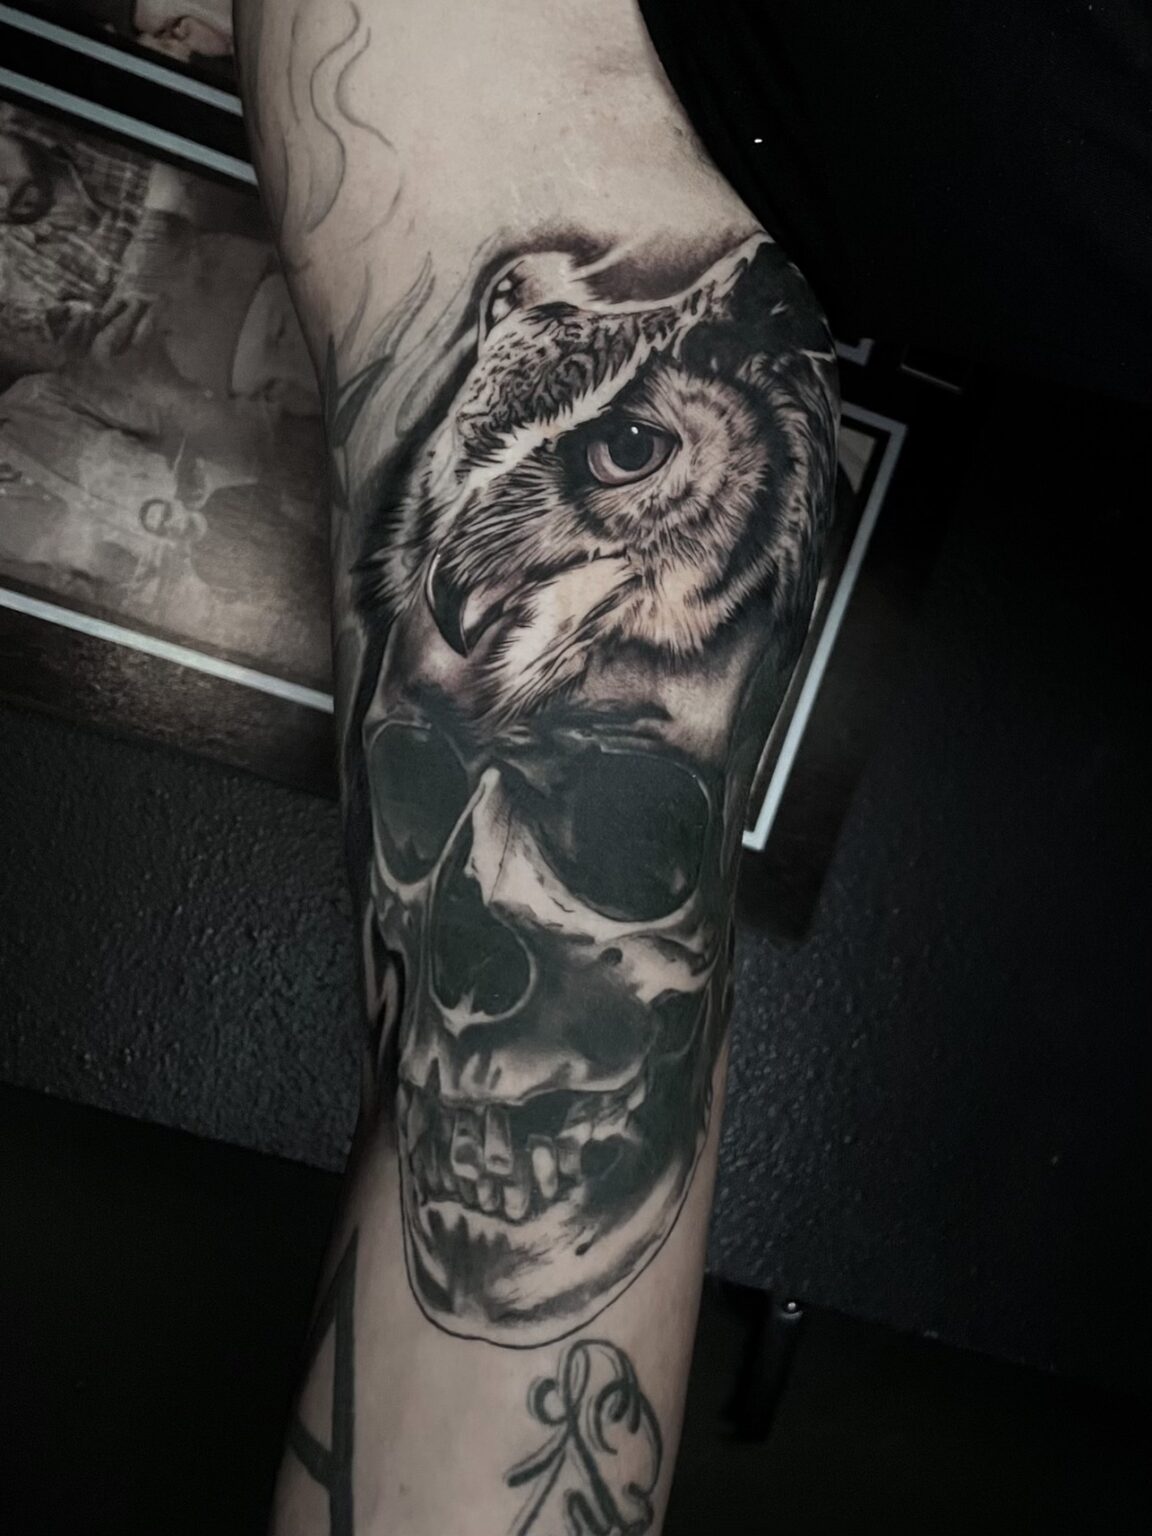 Intriguing human skull and owl morphed tattoo on the inner bicep